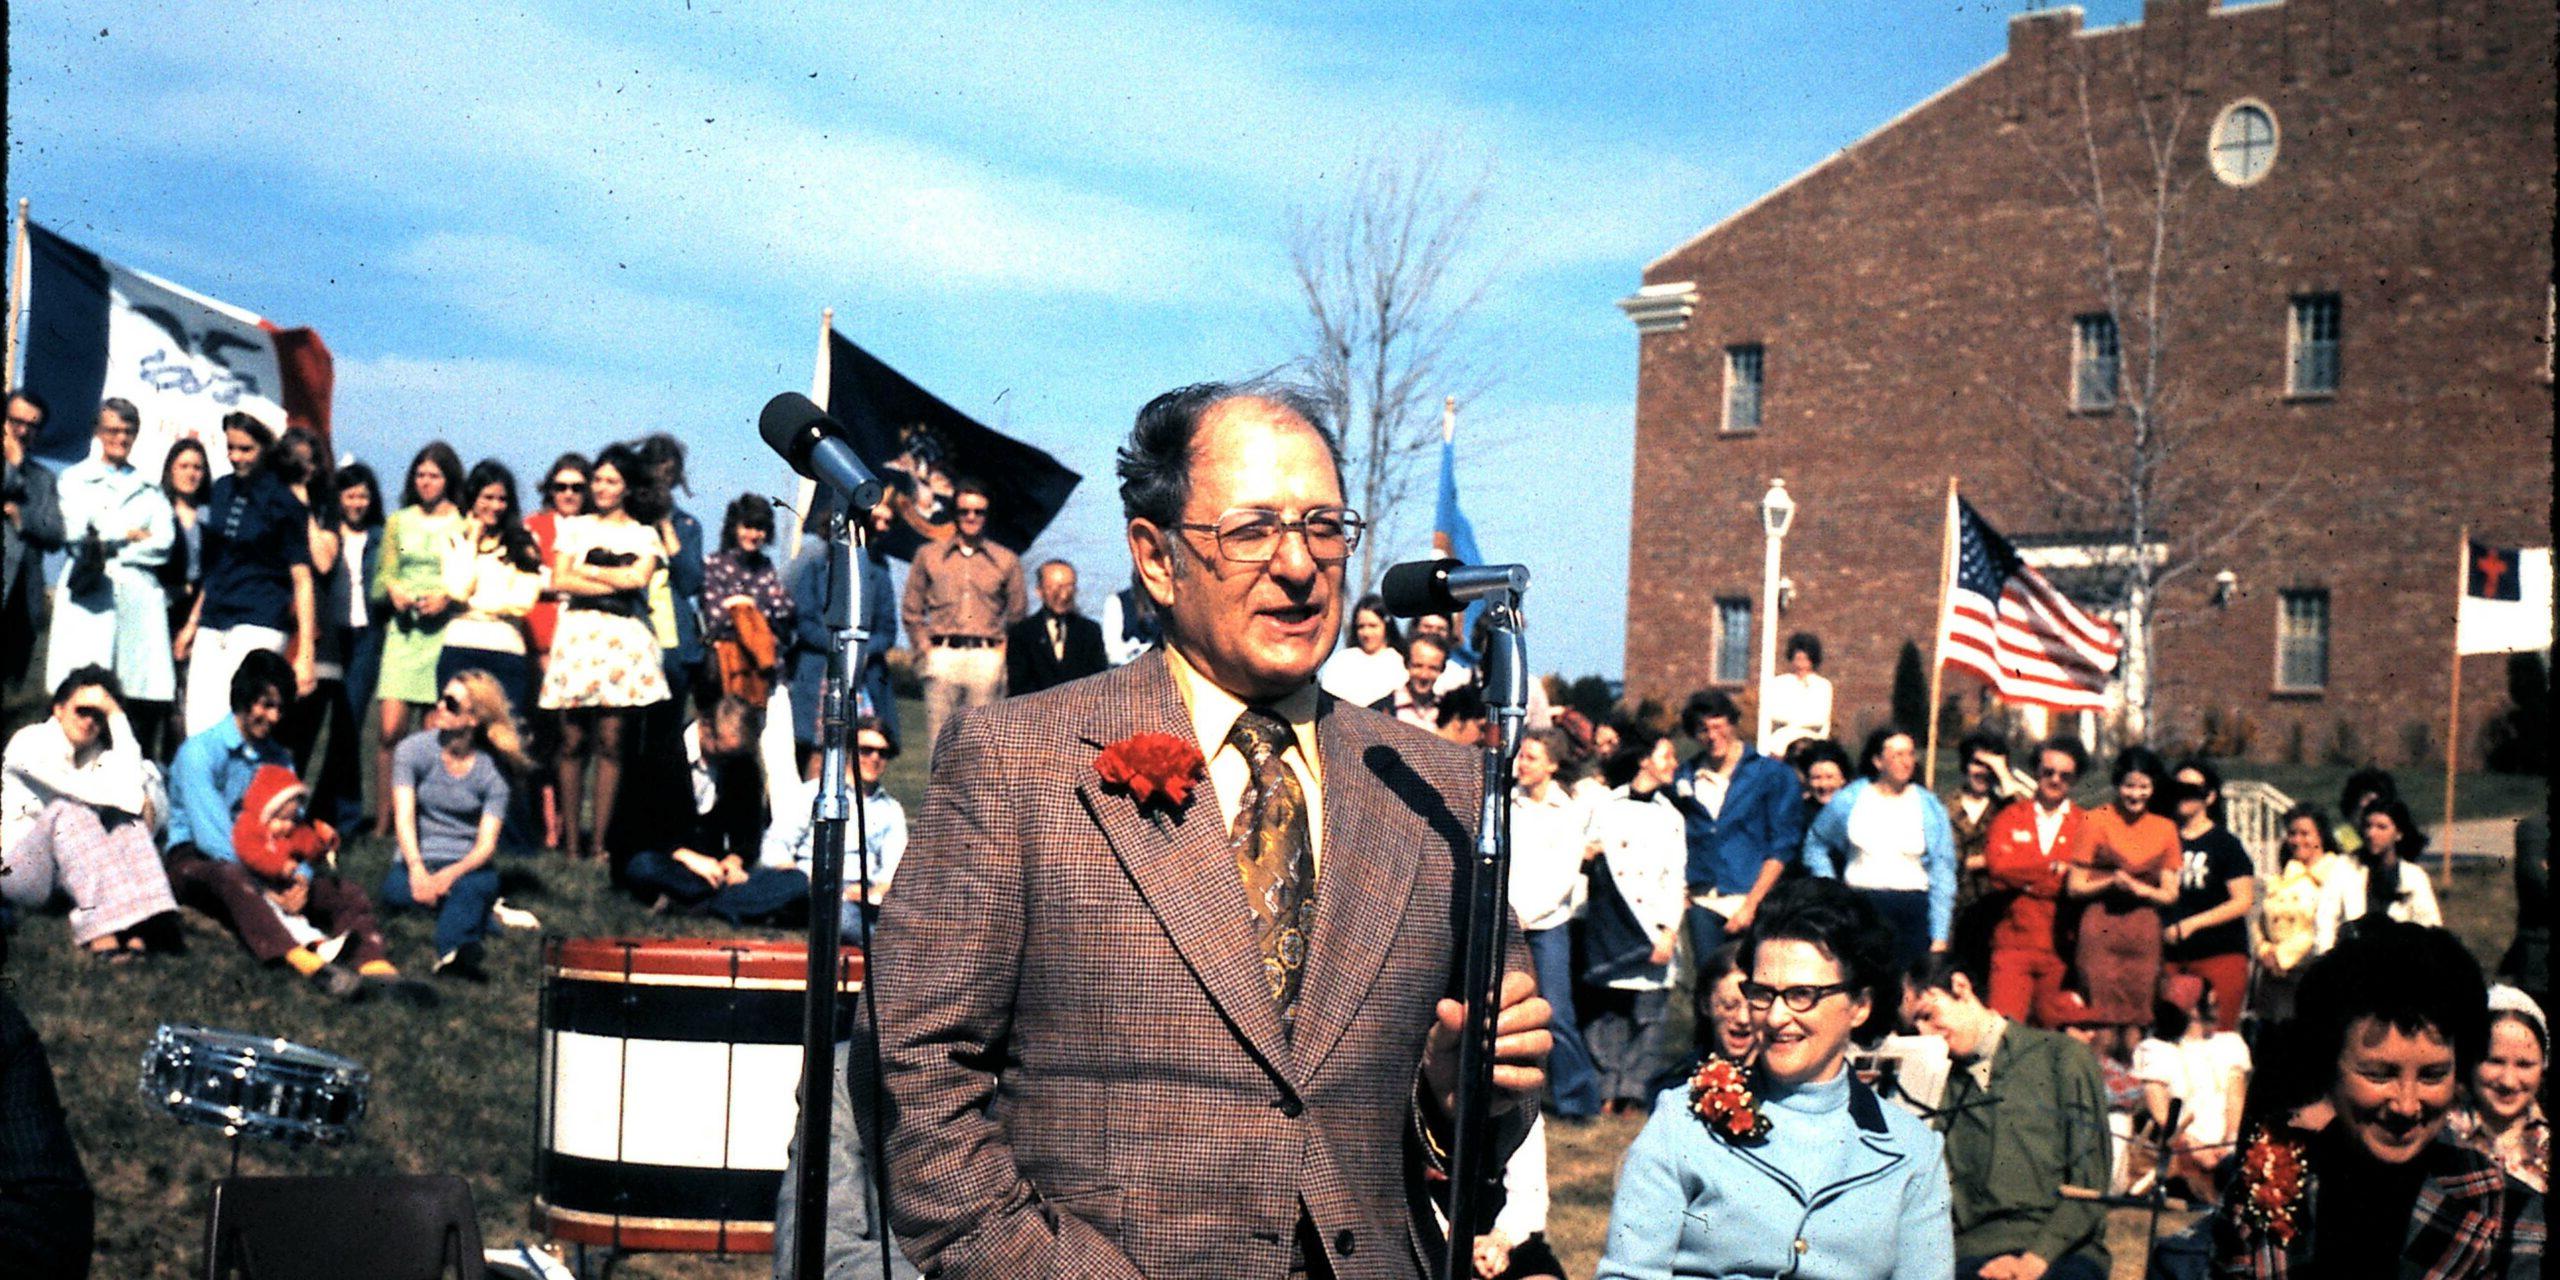 Dr Donald Metz in foreground at MNU initial accreditation celebration in 1974